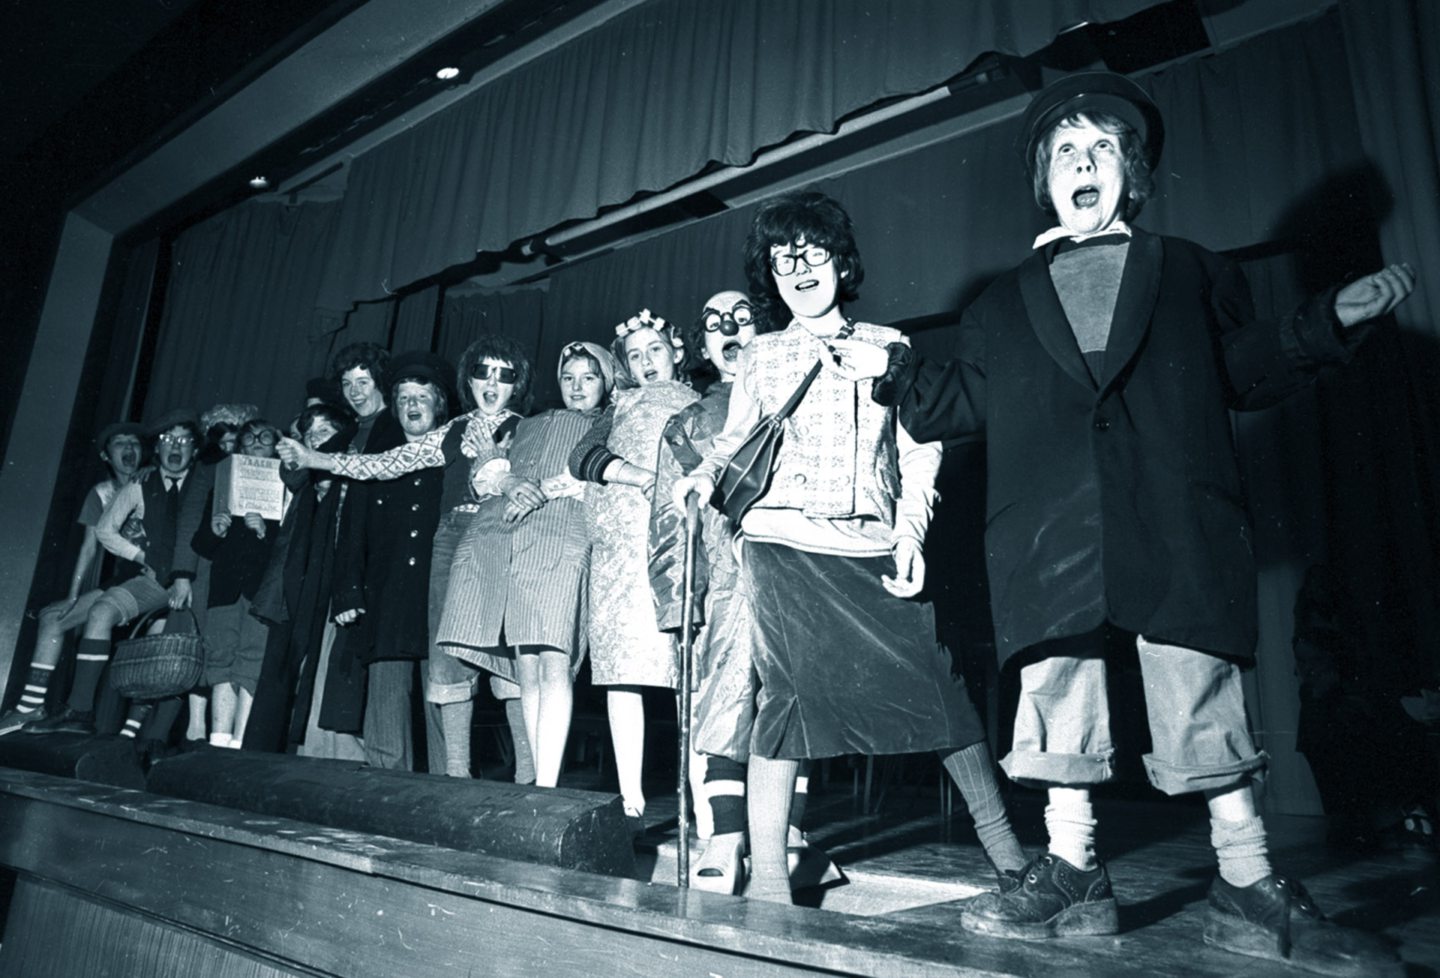 Dressed up as janitors and cleaners, pupils of Summerhill Academy, Aberdeen, in rehearsal for their production of Skool Sketches which they presented in March 1977.